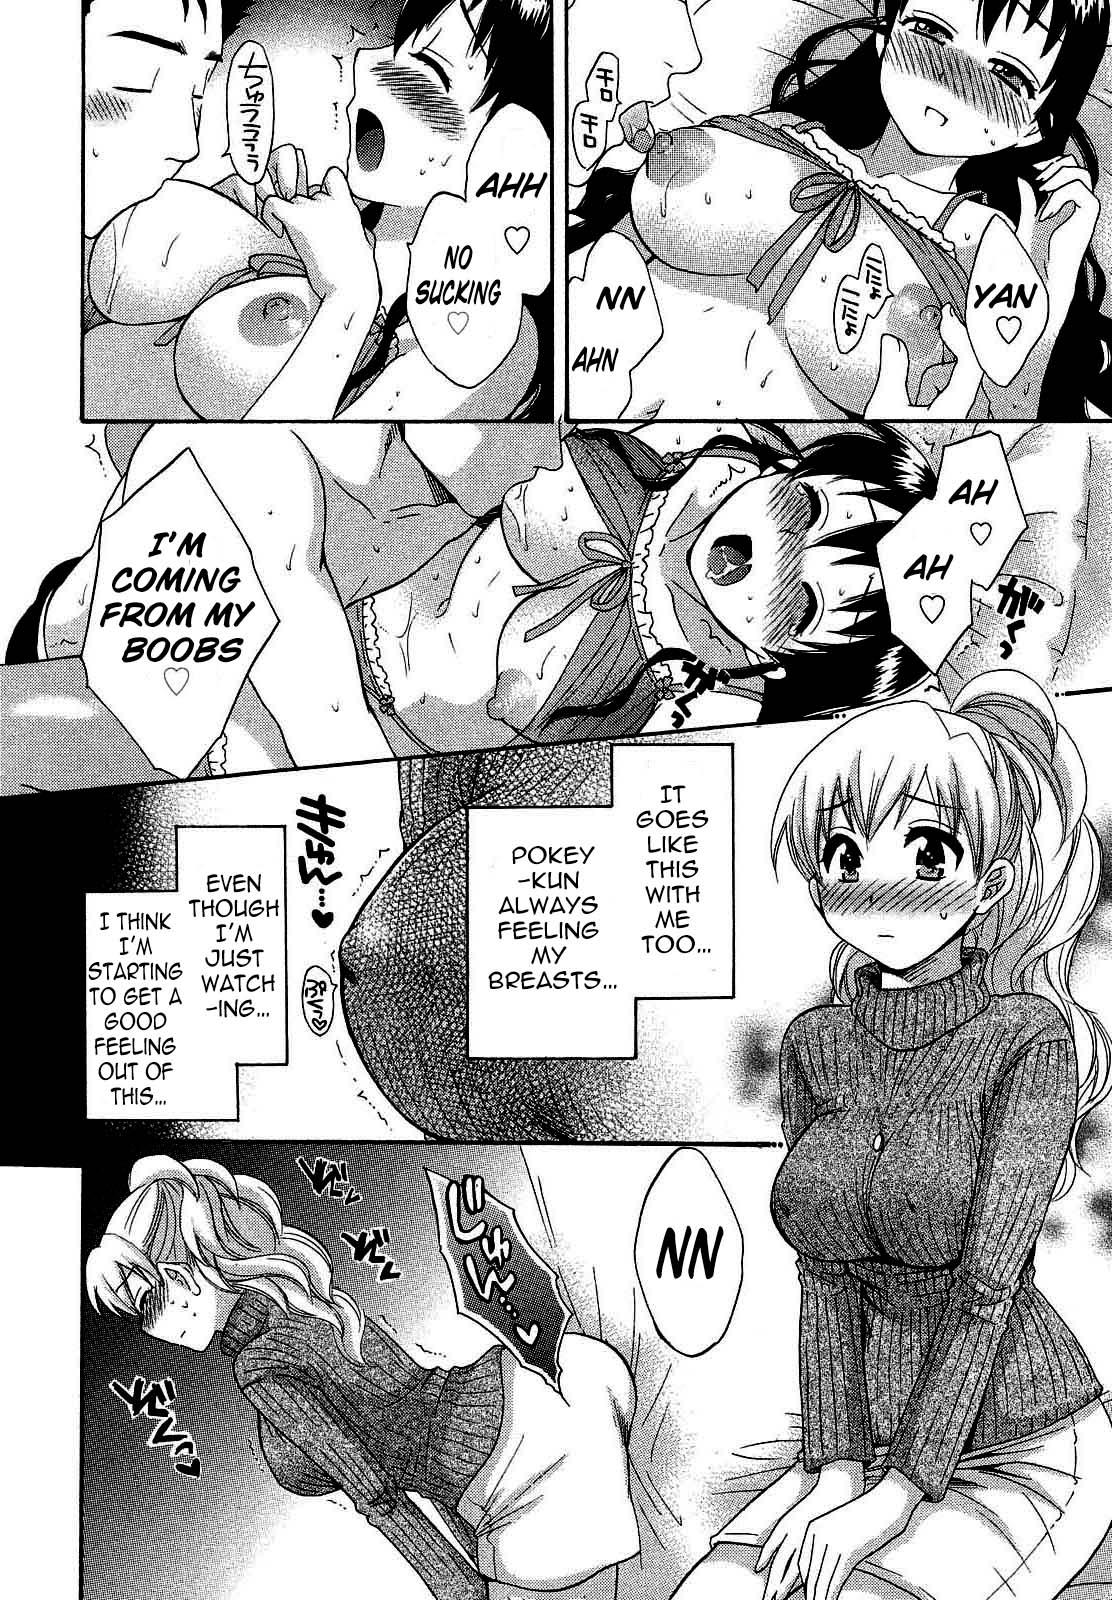 Chaturbate Tenshi no Marshmallow 3 Ch. 22 Ejaculation - Page 12